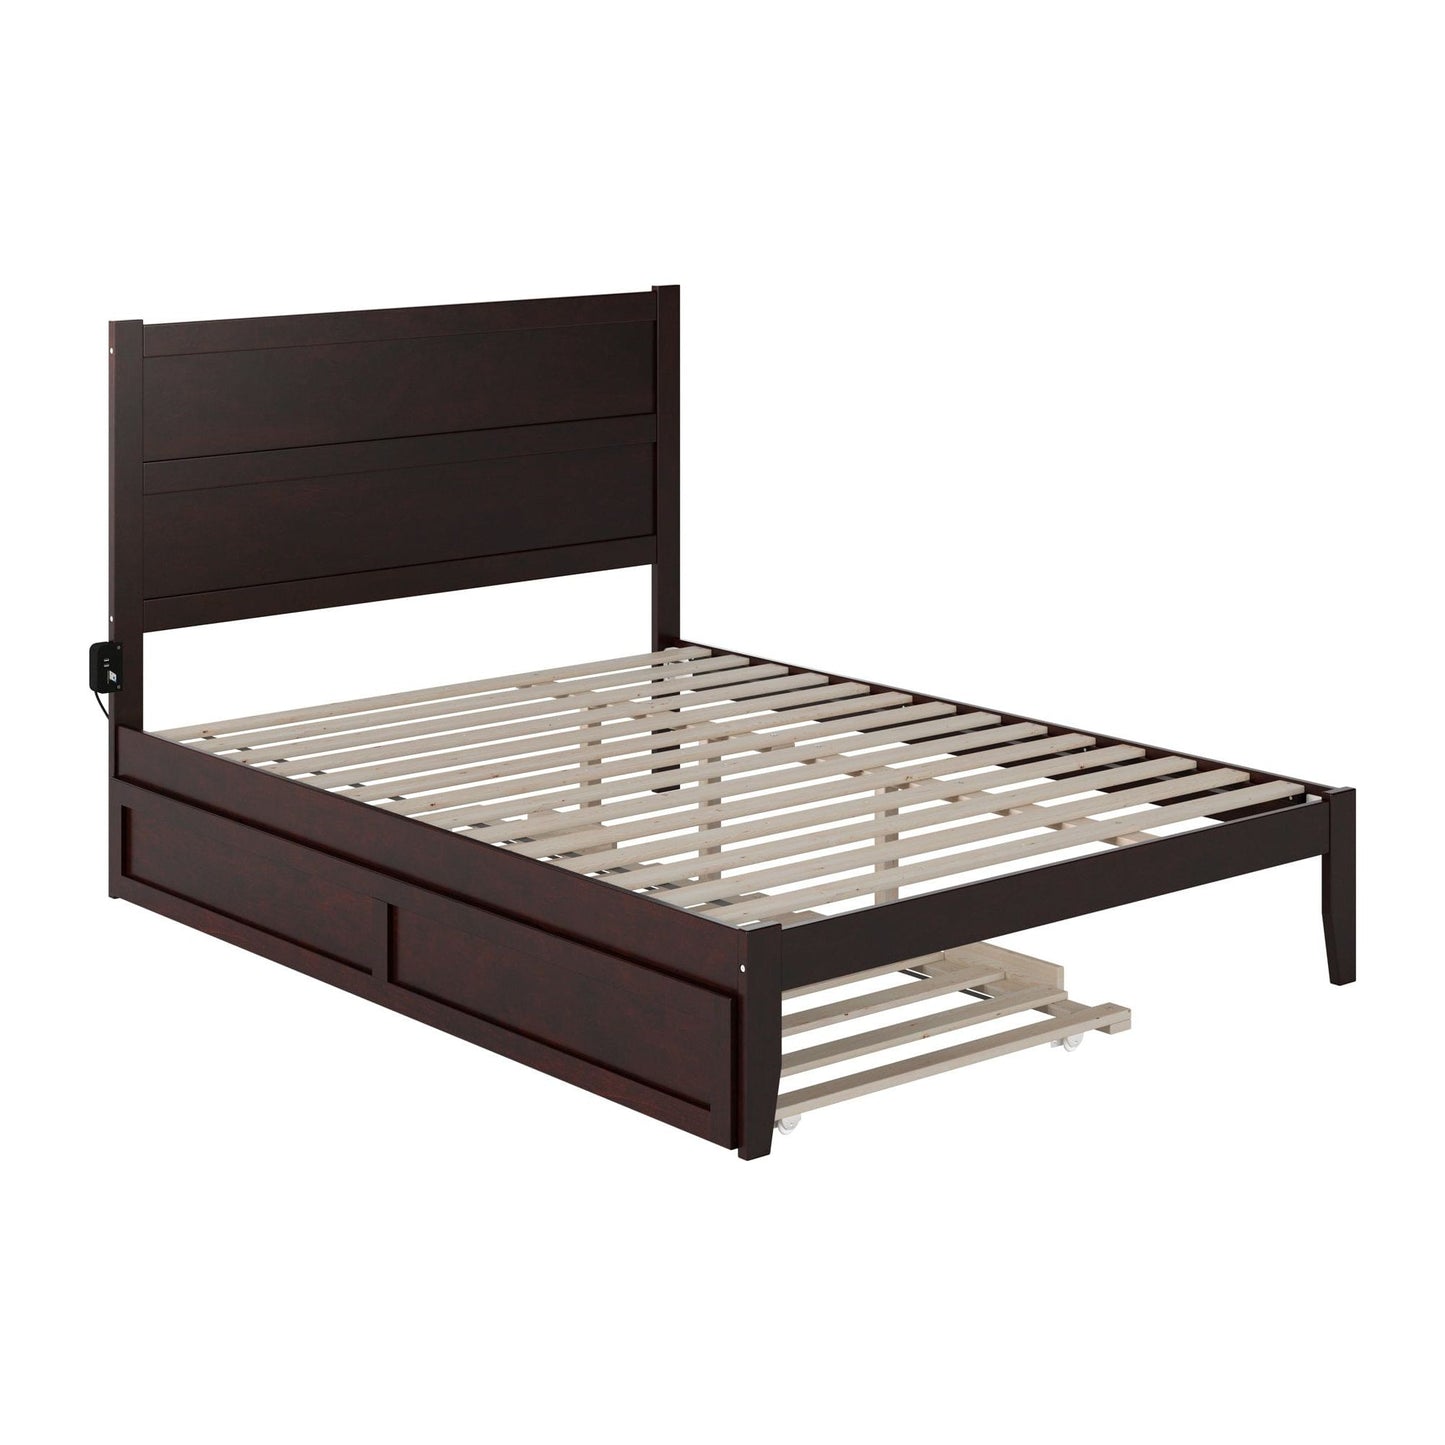 AFI Furnishings NoHo Queen Bed with Twin Extra Long Trundle in Espresso AG9111141